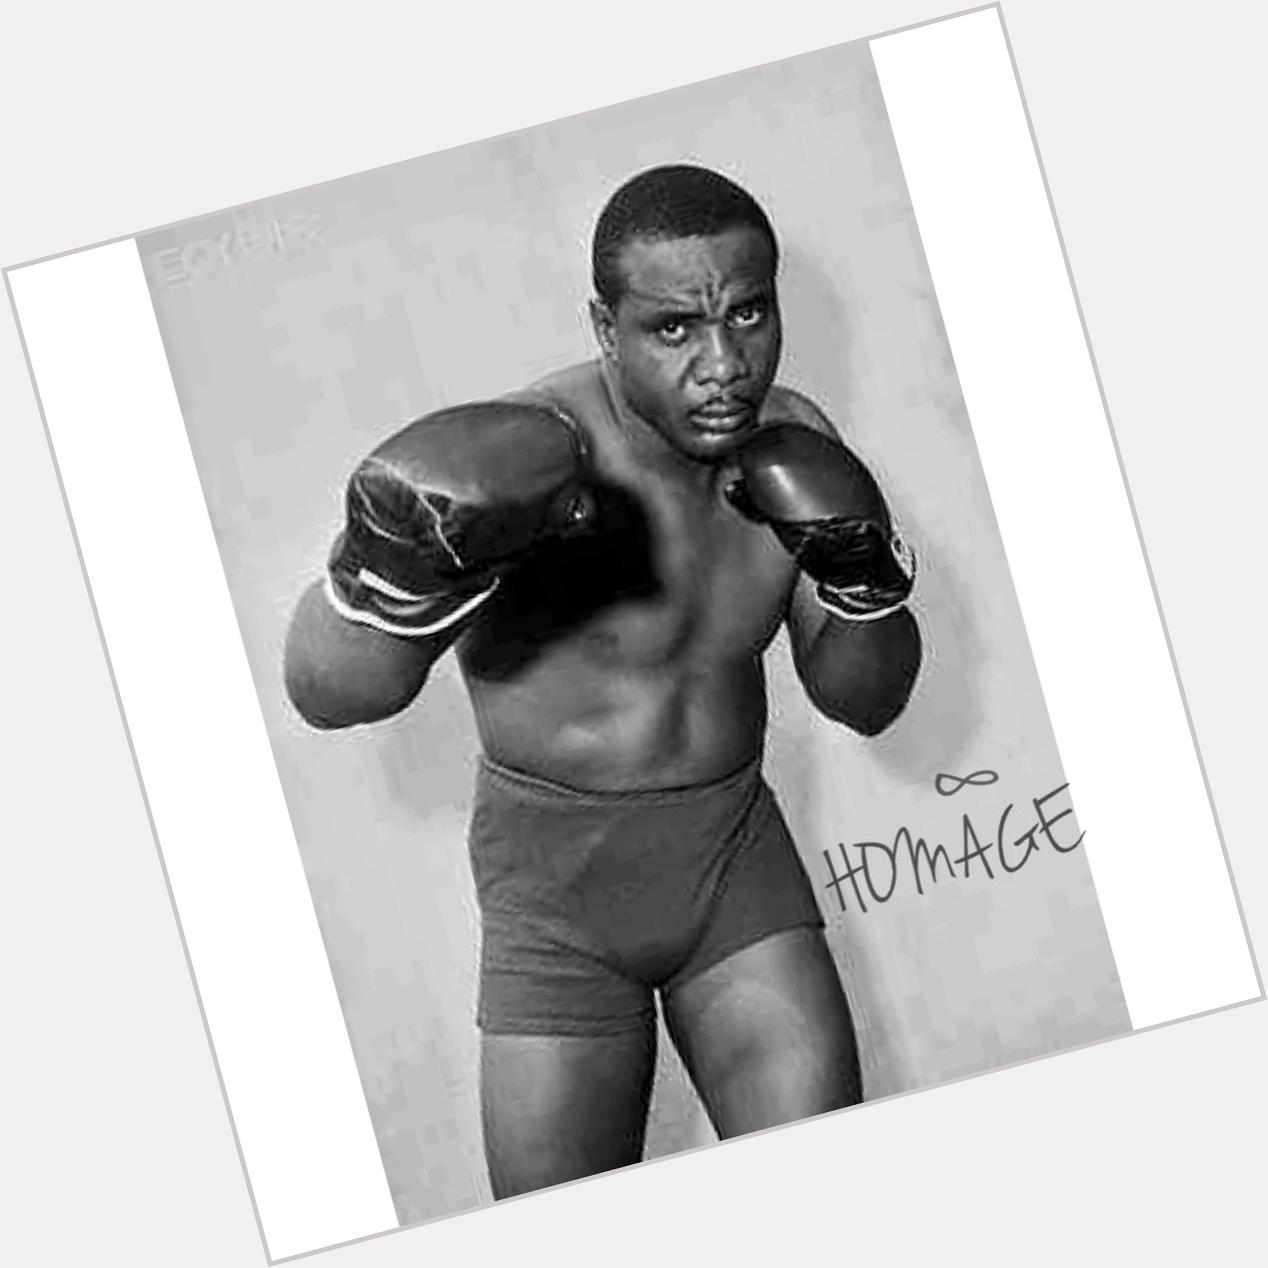 Happy Bday to Sonny Liston! He became Heavy Weight Champ in \62 by knocking out Floyd Patterson in the 1st rnd. 